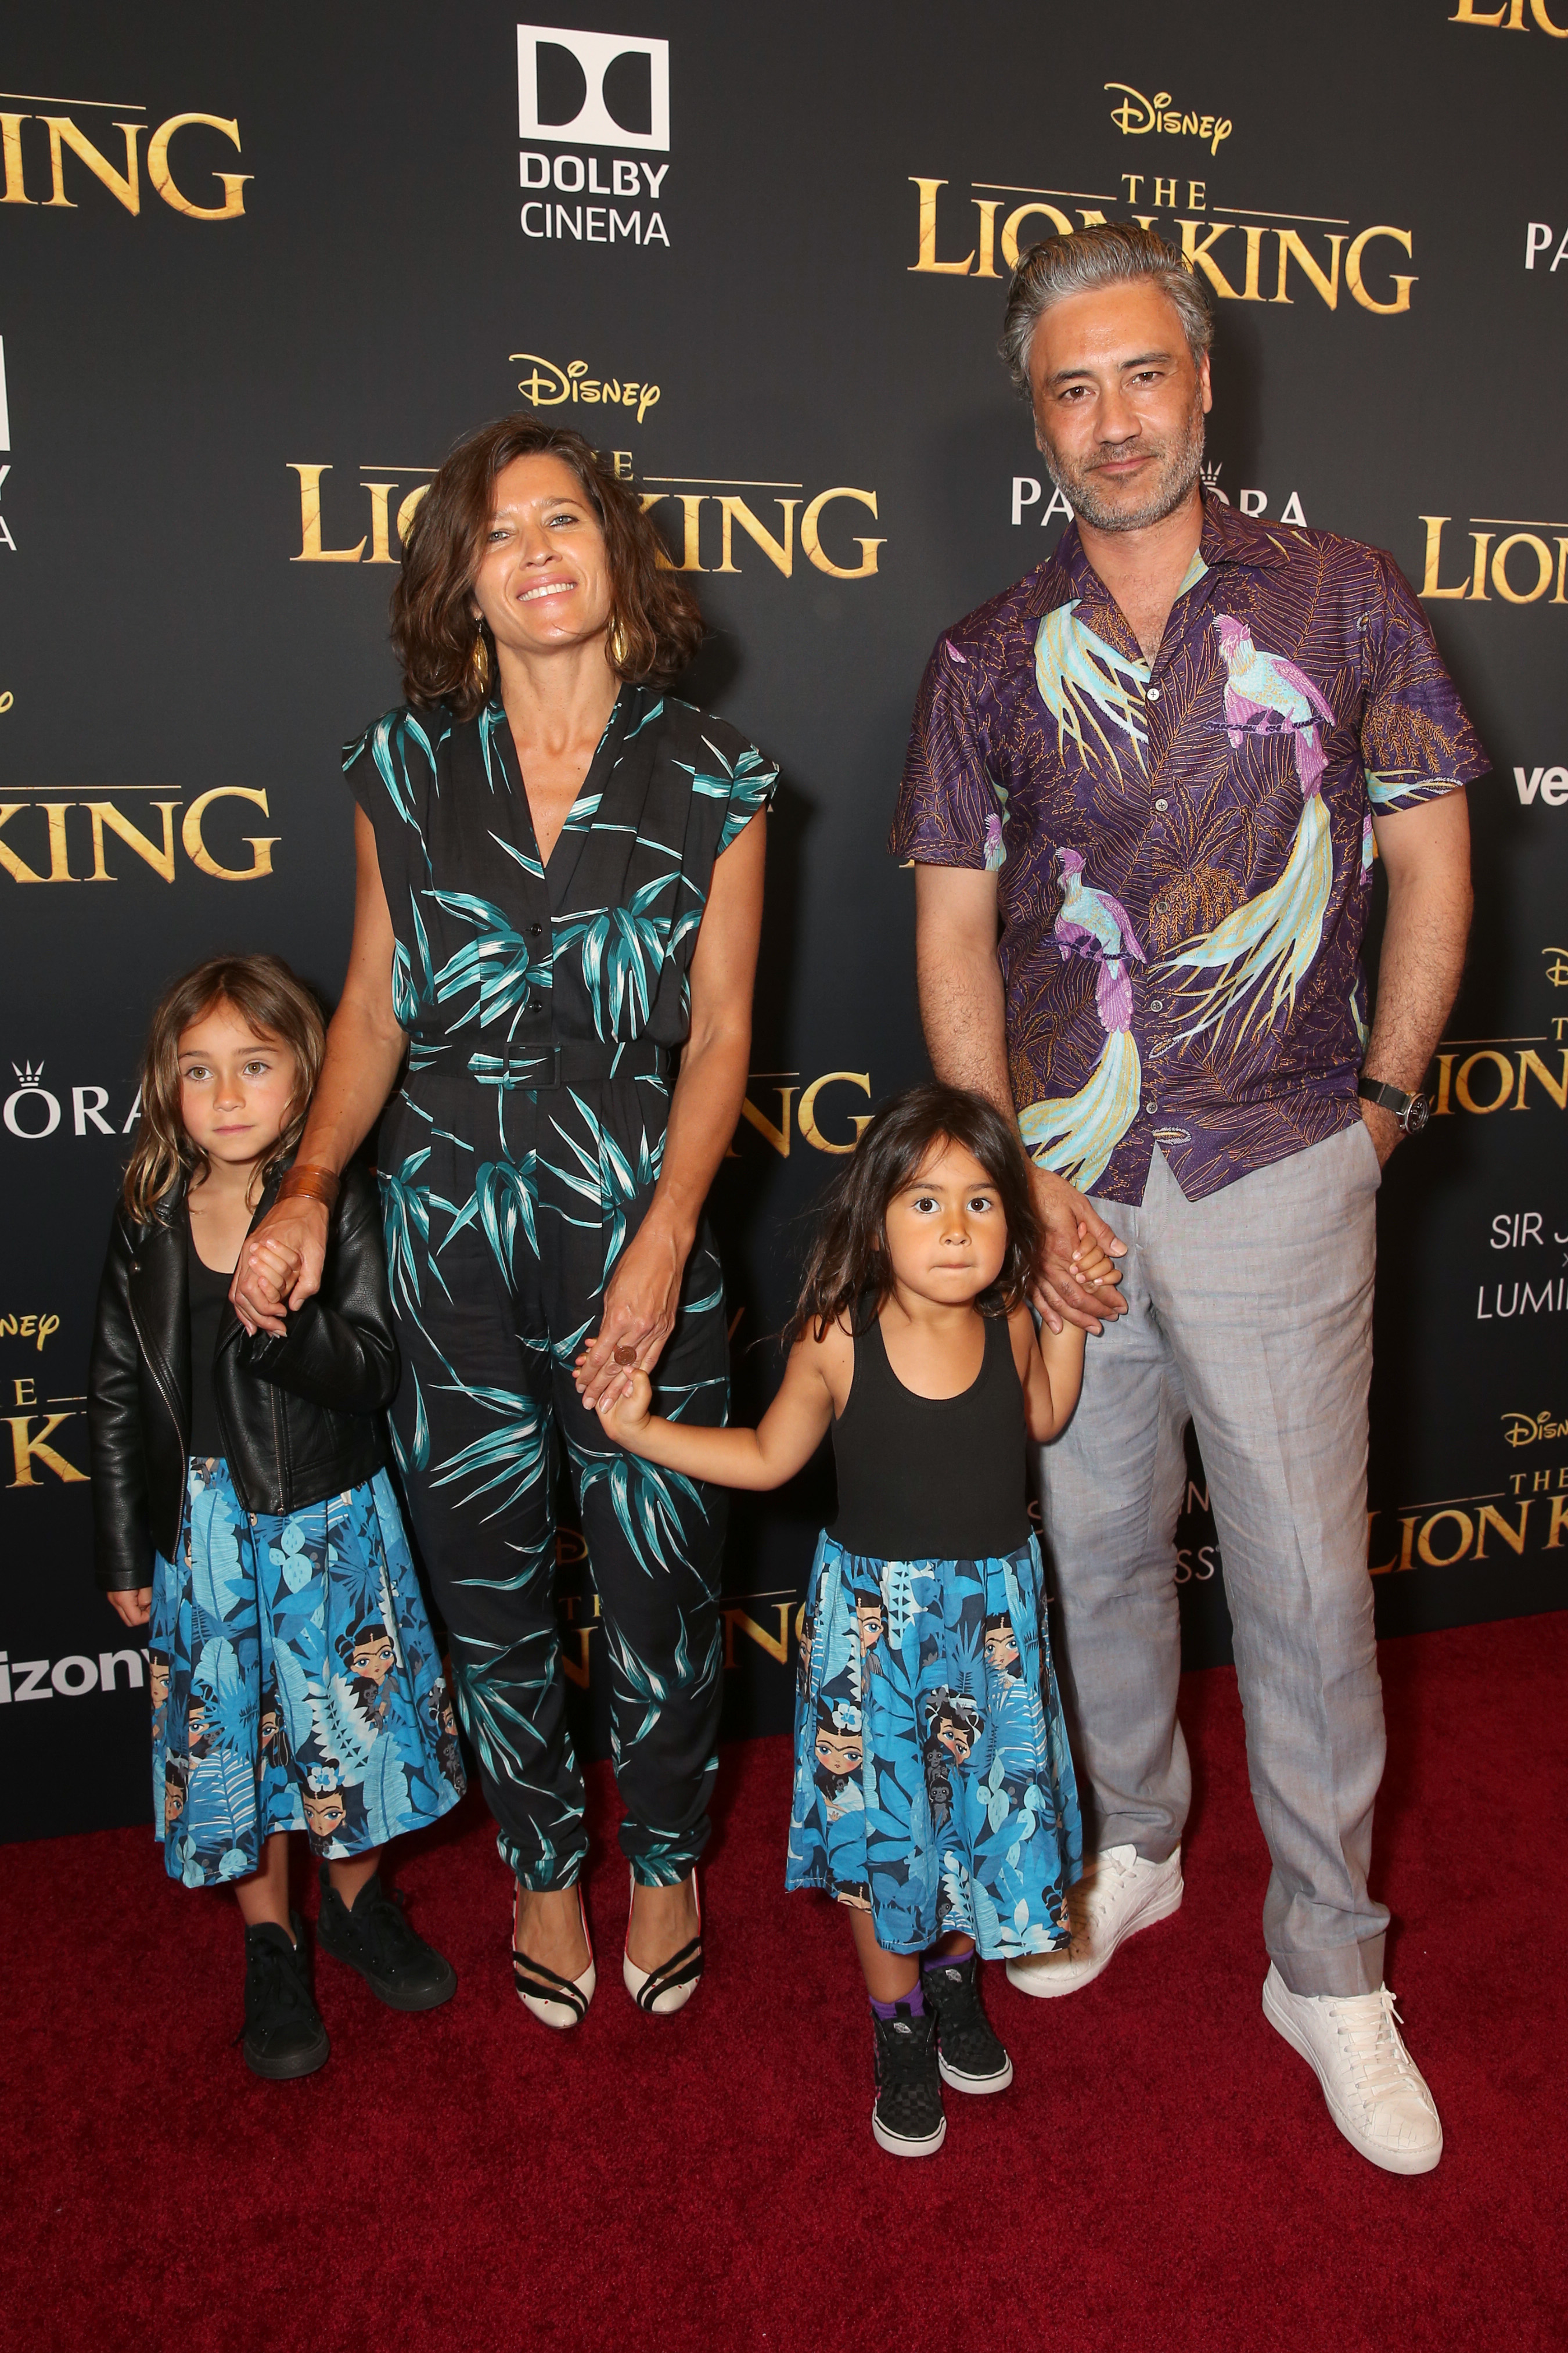 Taika, Chelsea, and their two children at The Lion King premiere, all wearing outfits with Polynesian-inspired prints